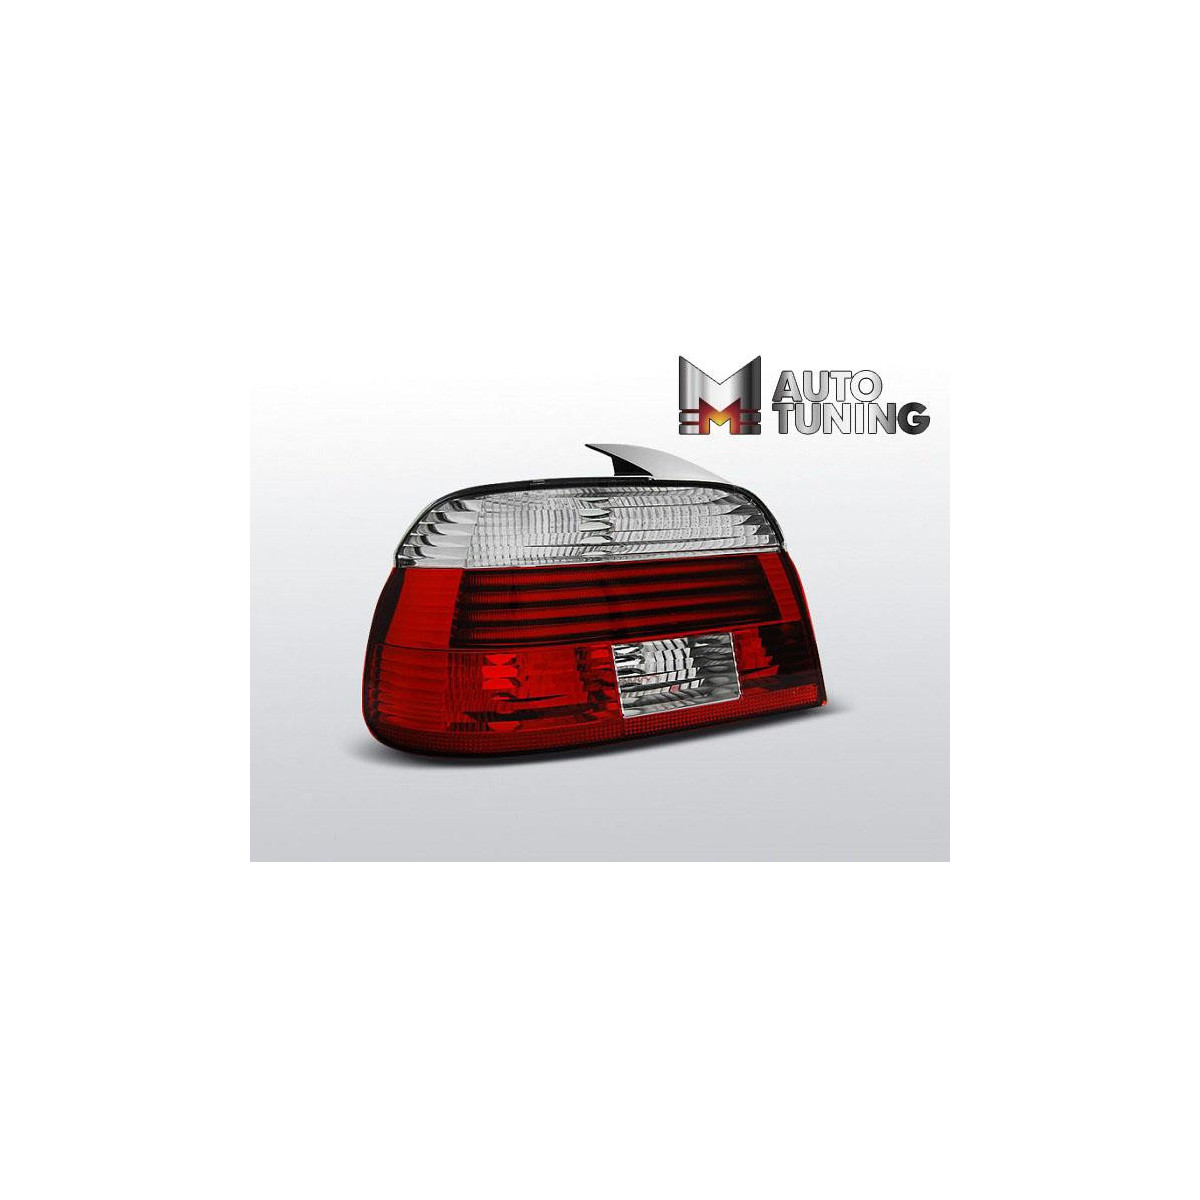 LAMPY BMW E39 09.00-06.03 RED WHITE LED